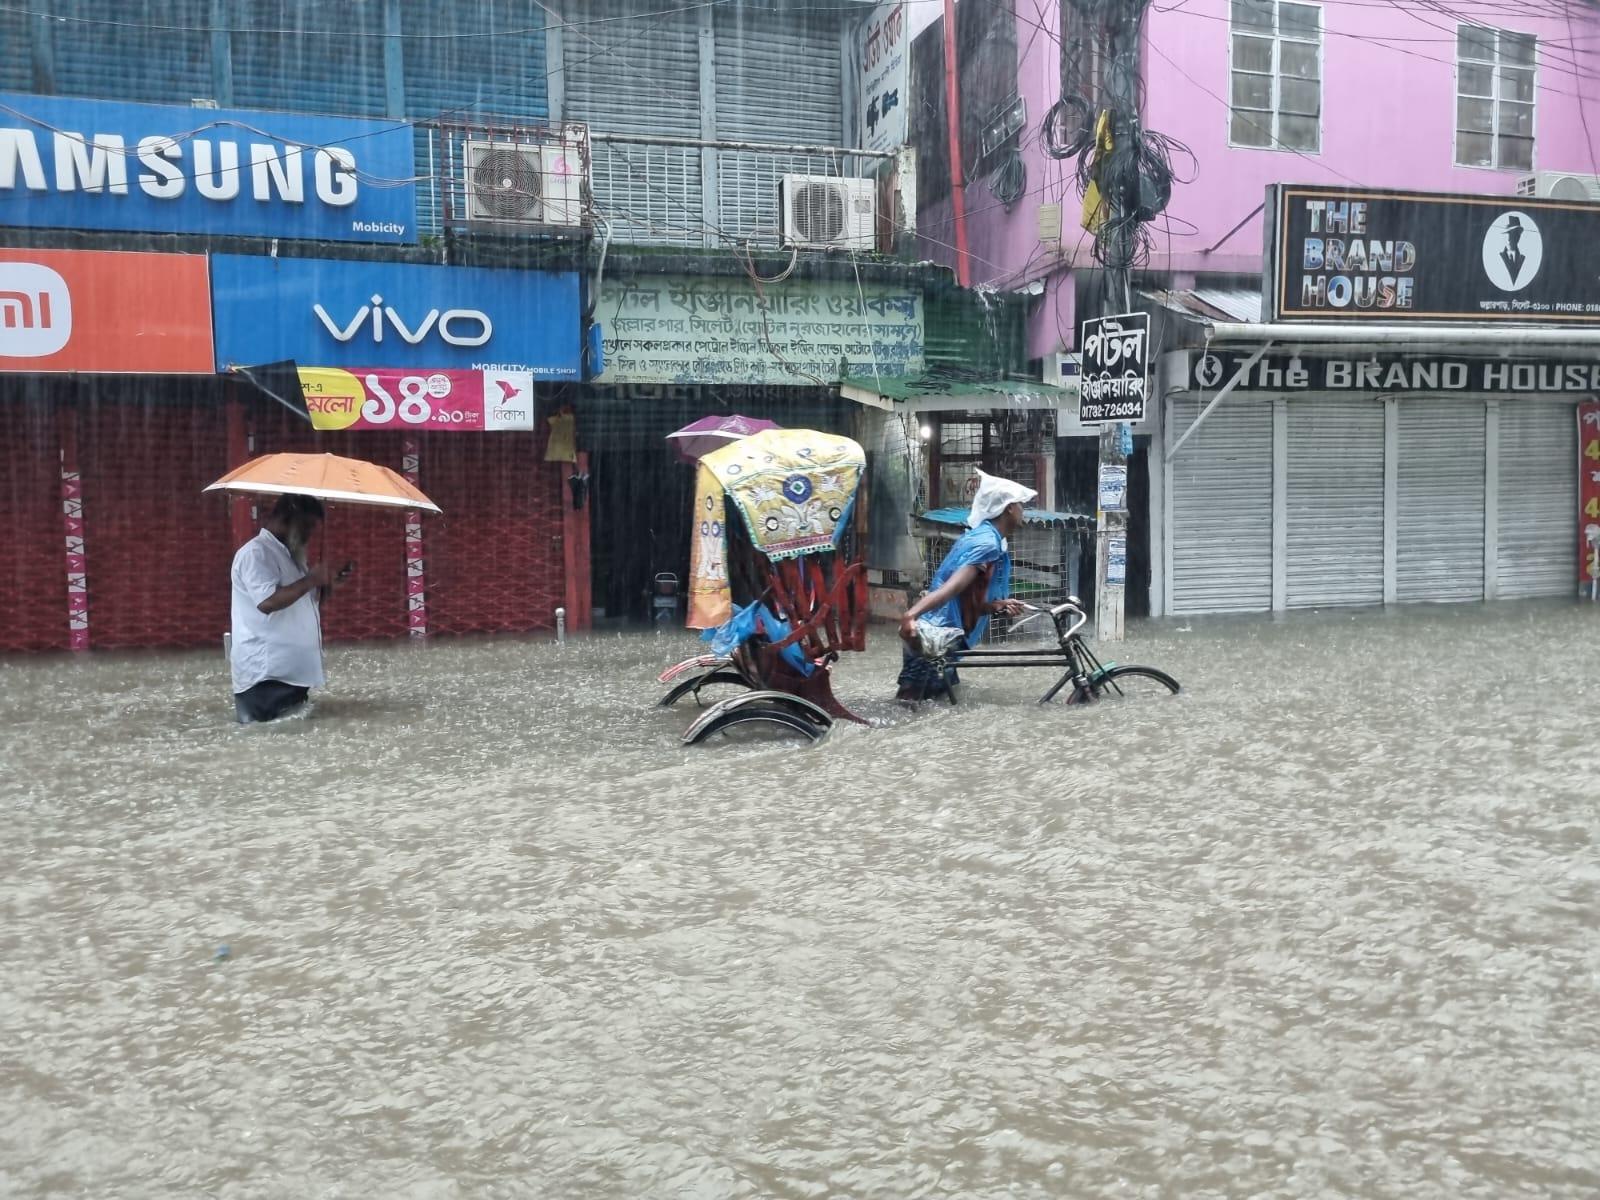 In Sylhet, the monsoon has caused the worst flooding for decades. Shops can’t open and roads are cut off.